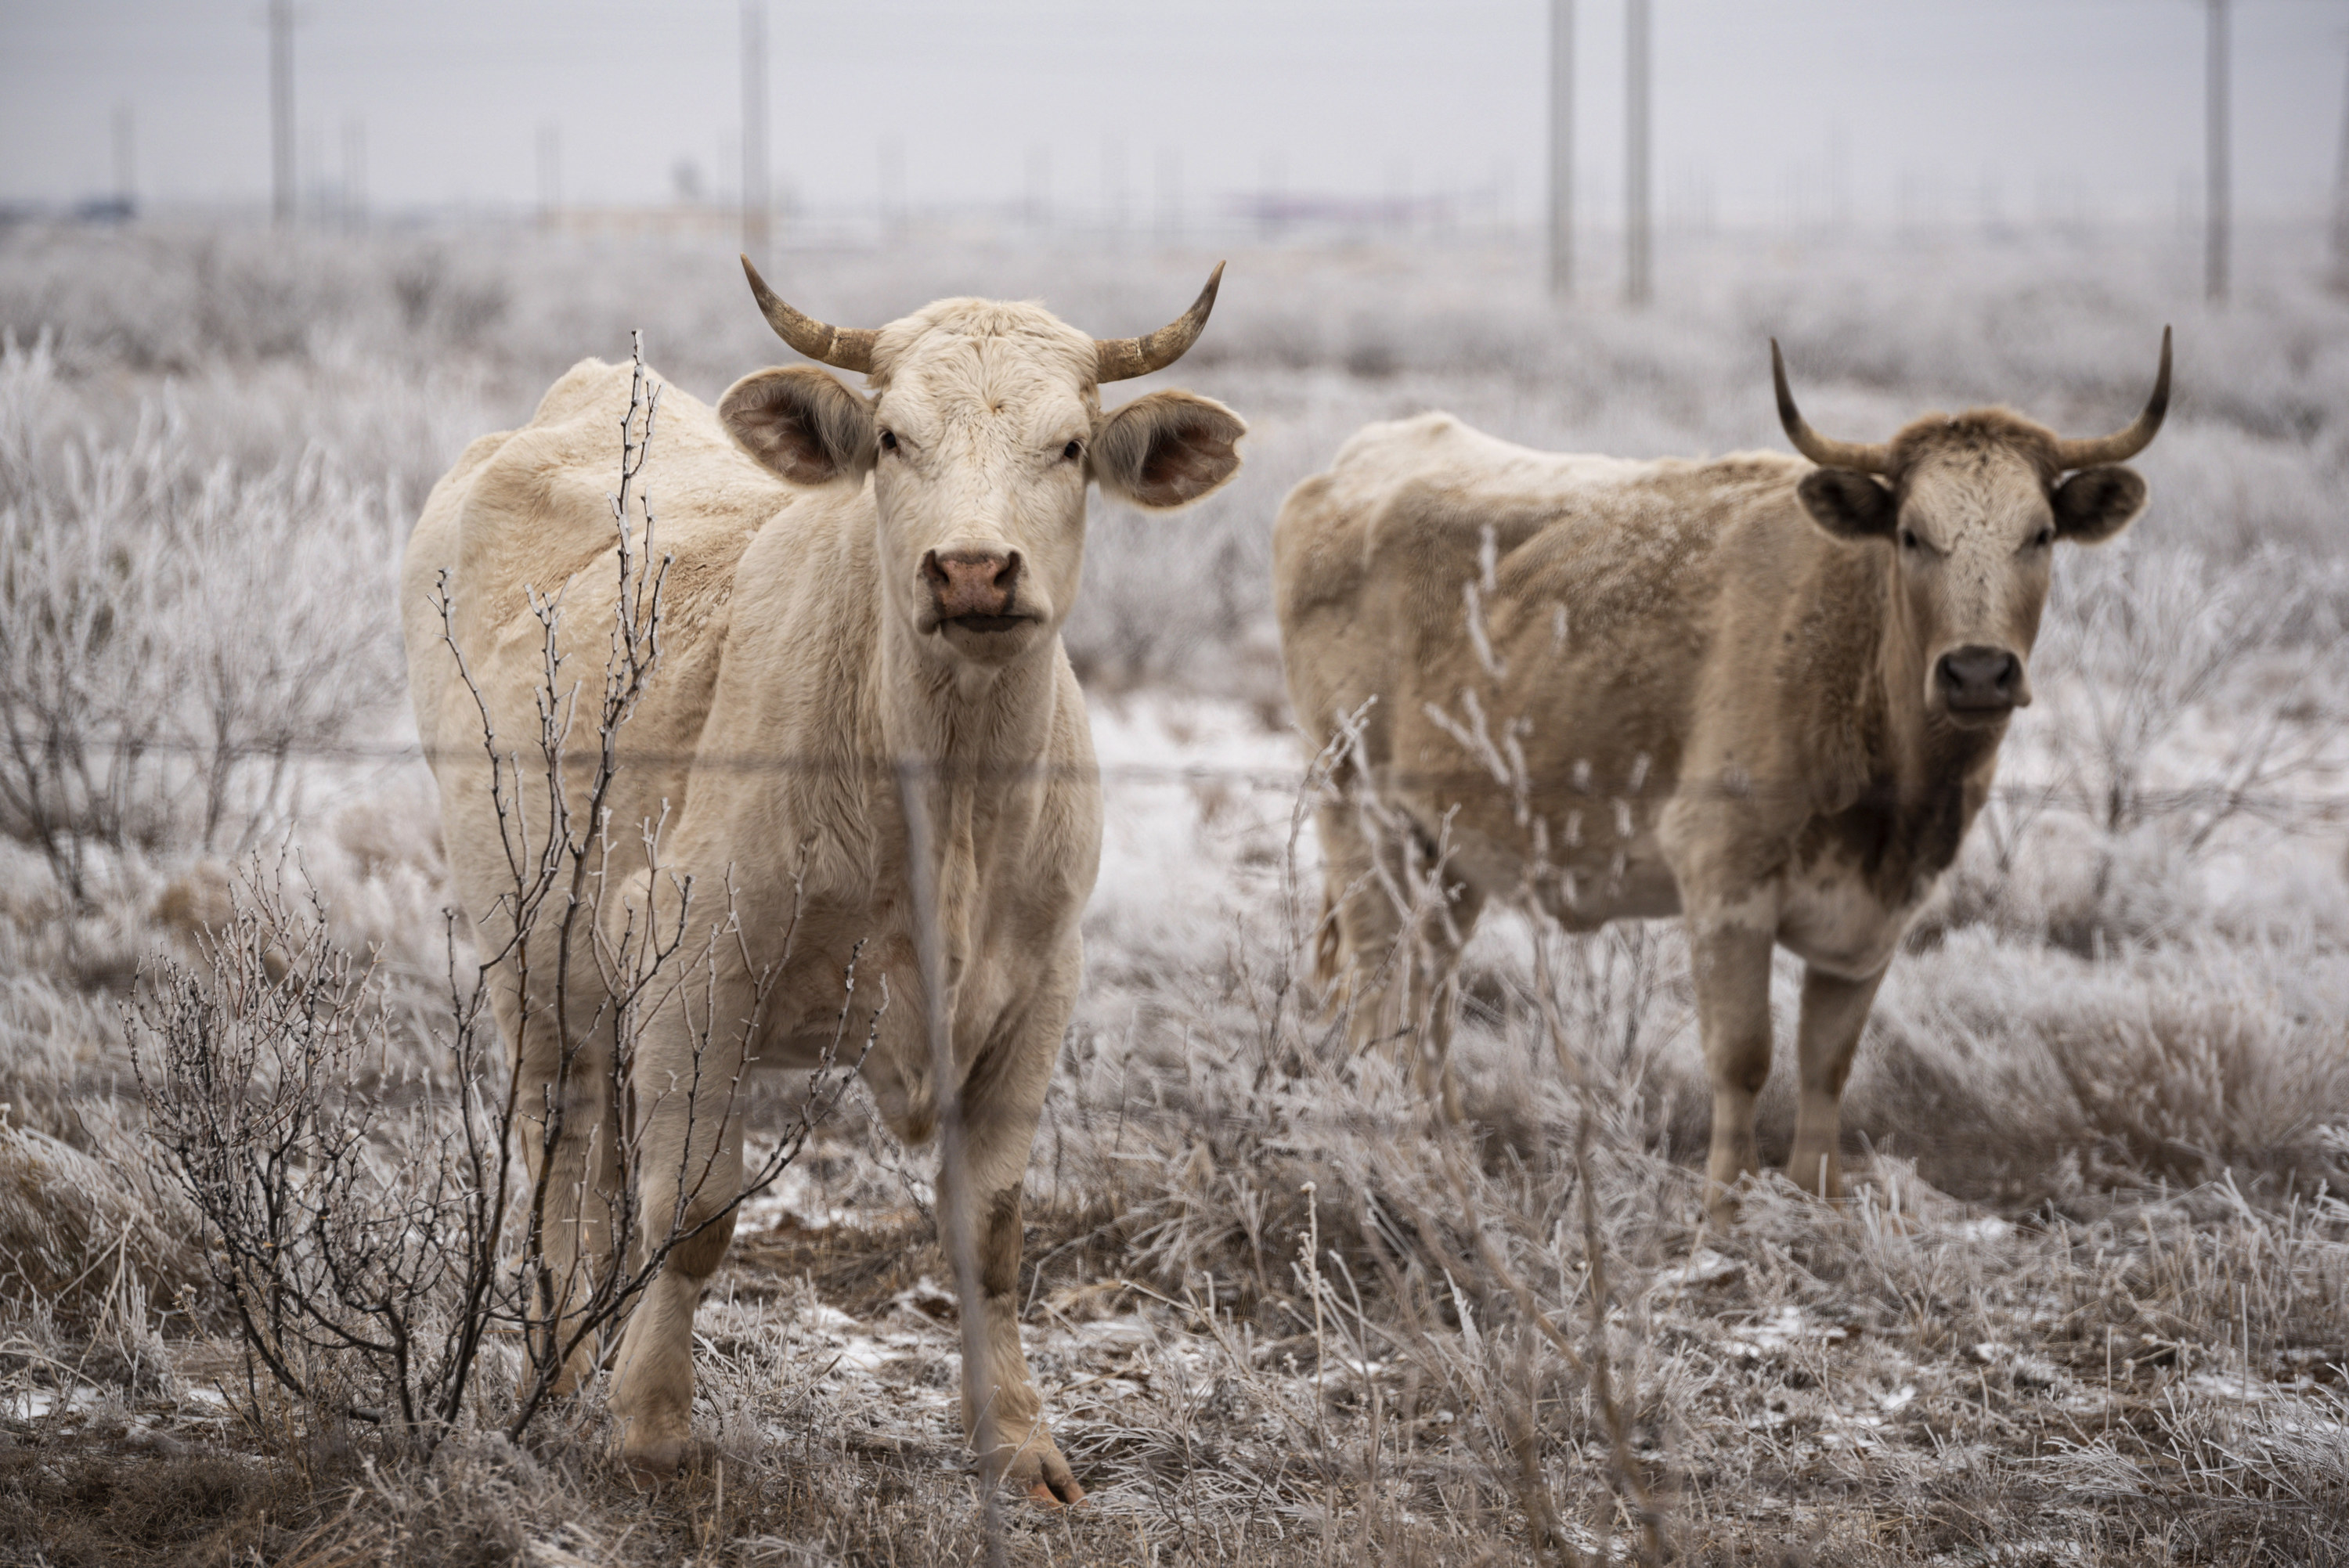 Two cows behind fencing on a snowy landscape in Texas